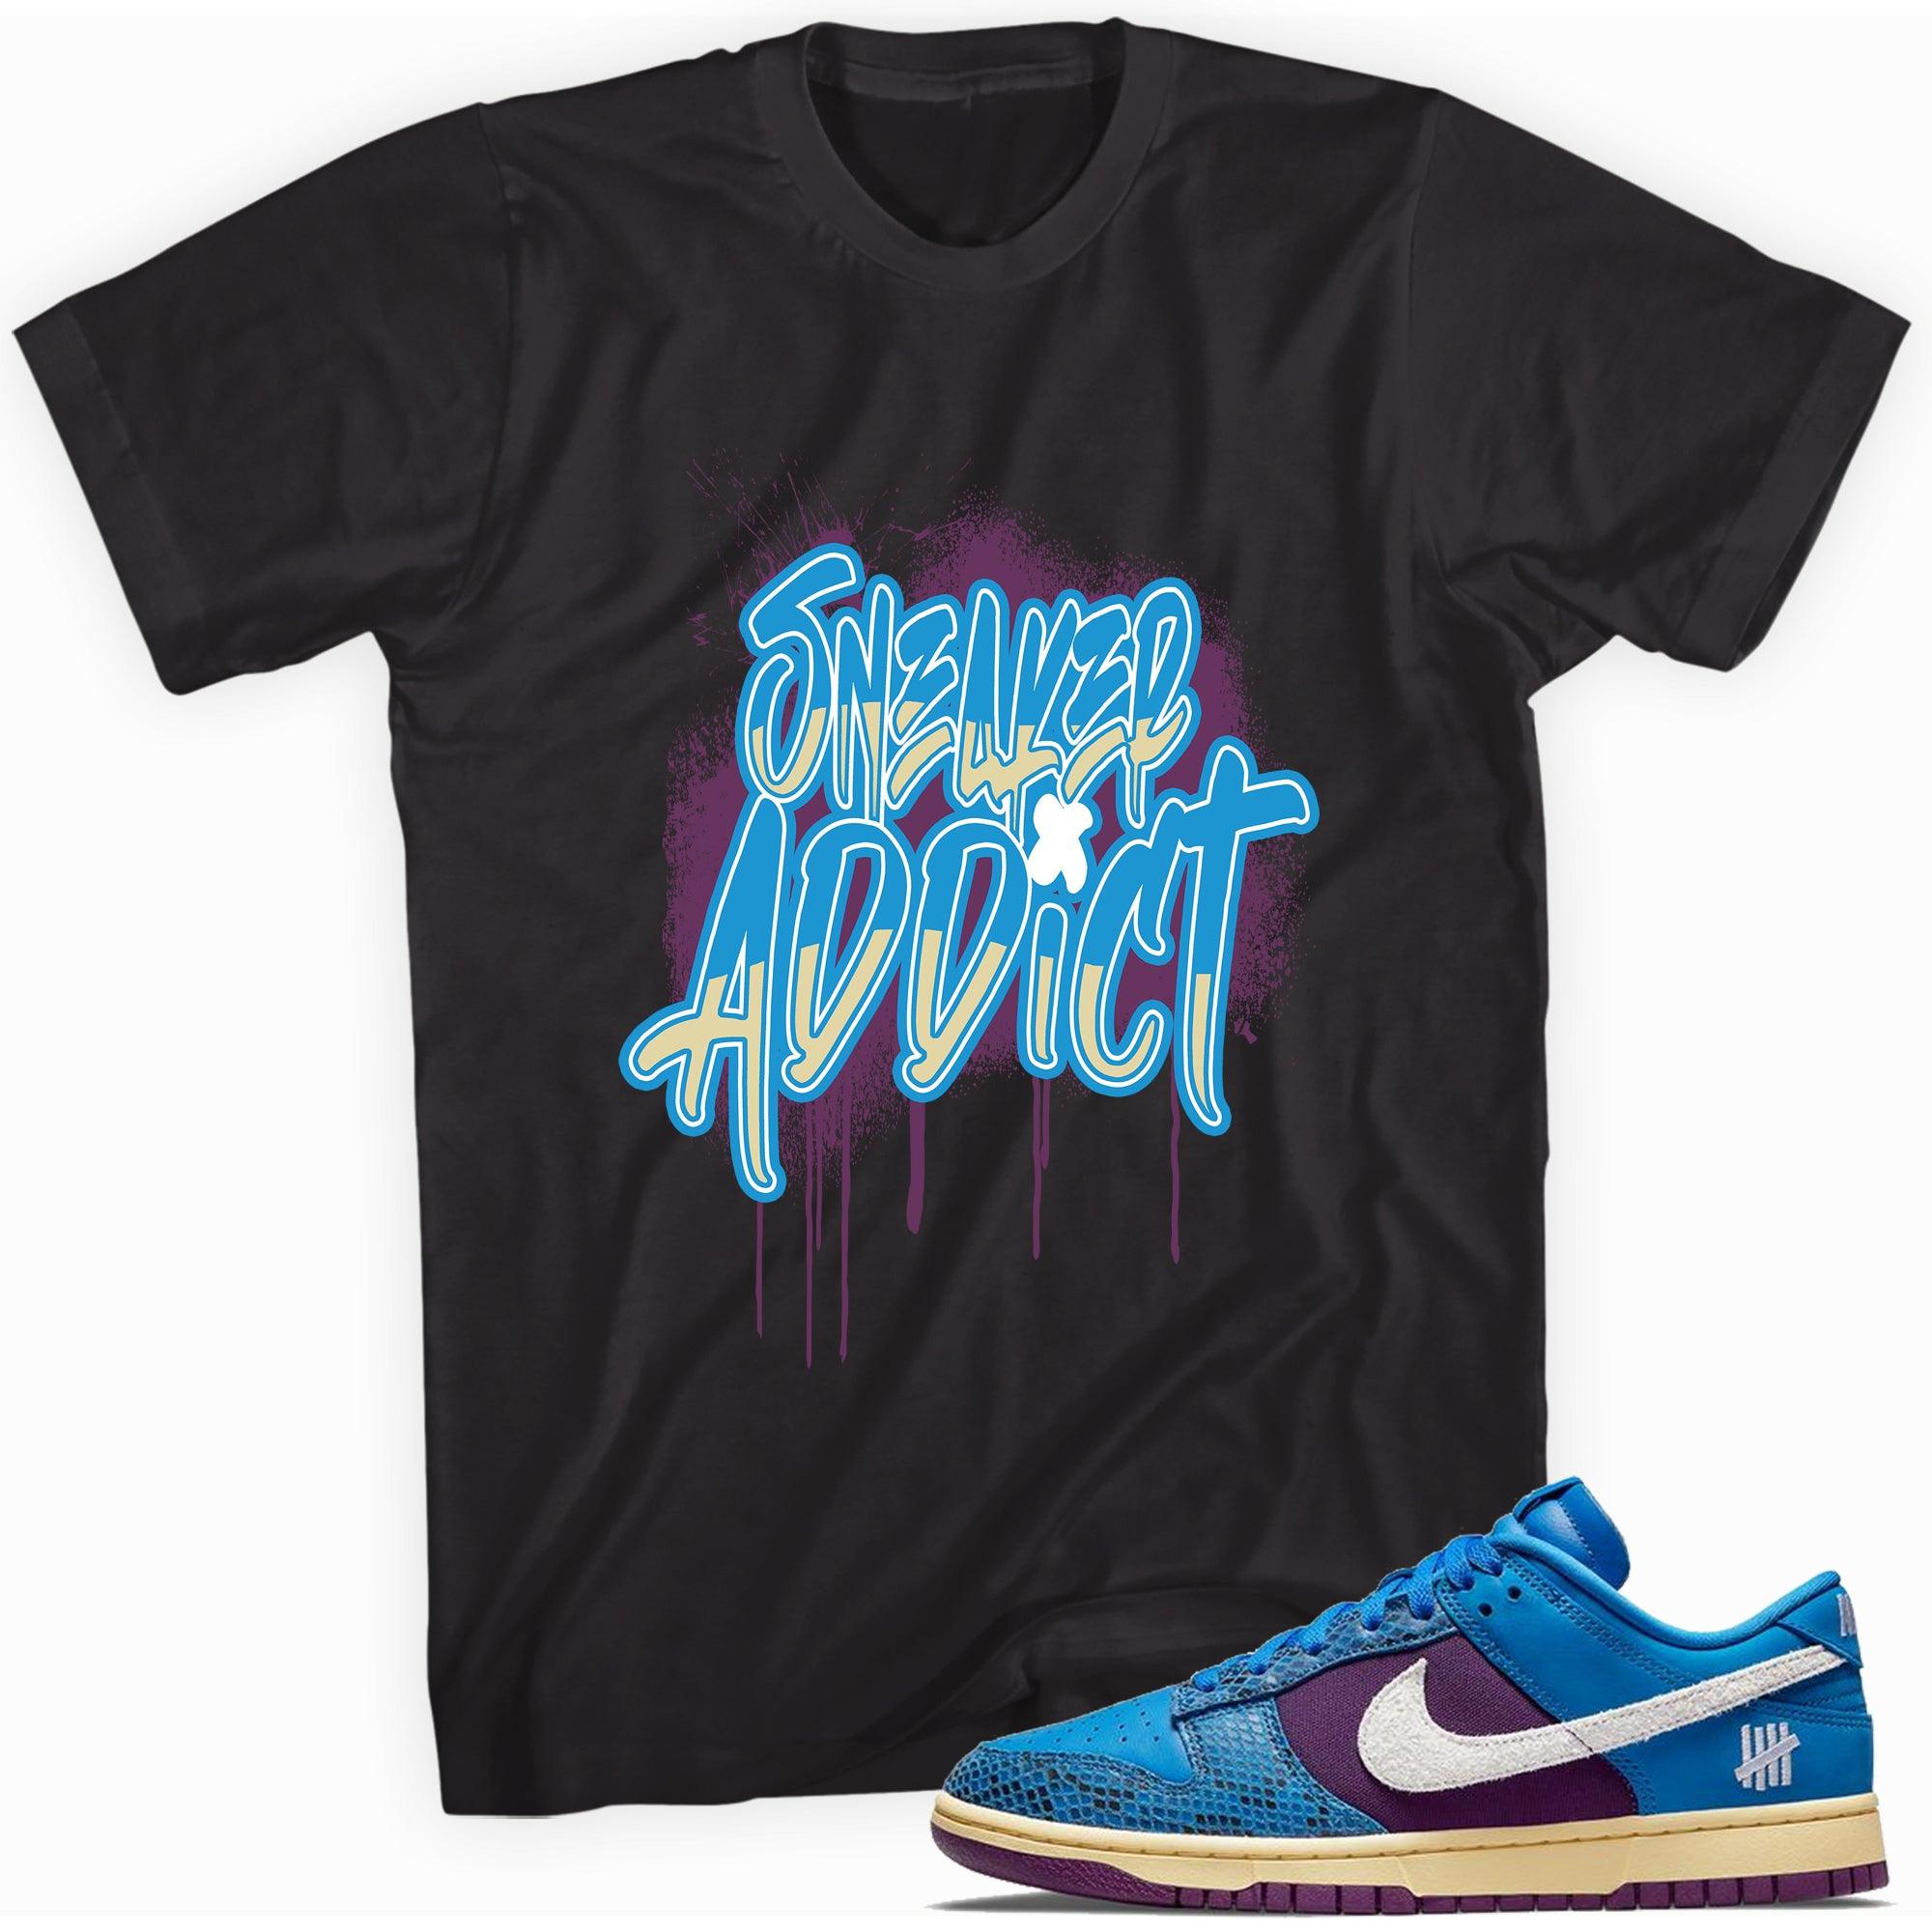 Black Sneaker Addict Shirt Nike Dunks Low Undefeated 5 On It Dunk vs AF1 photo